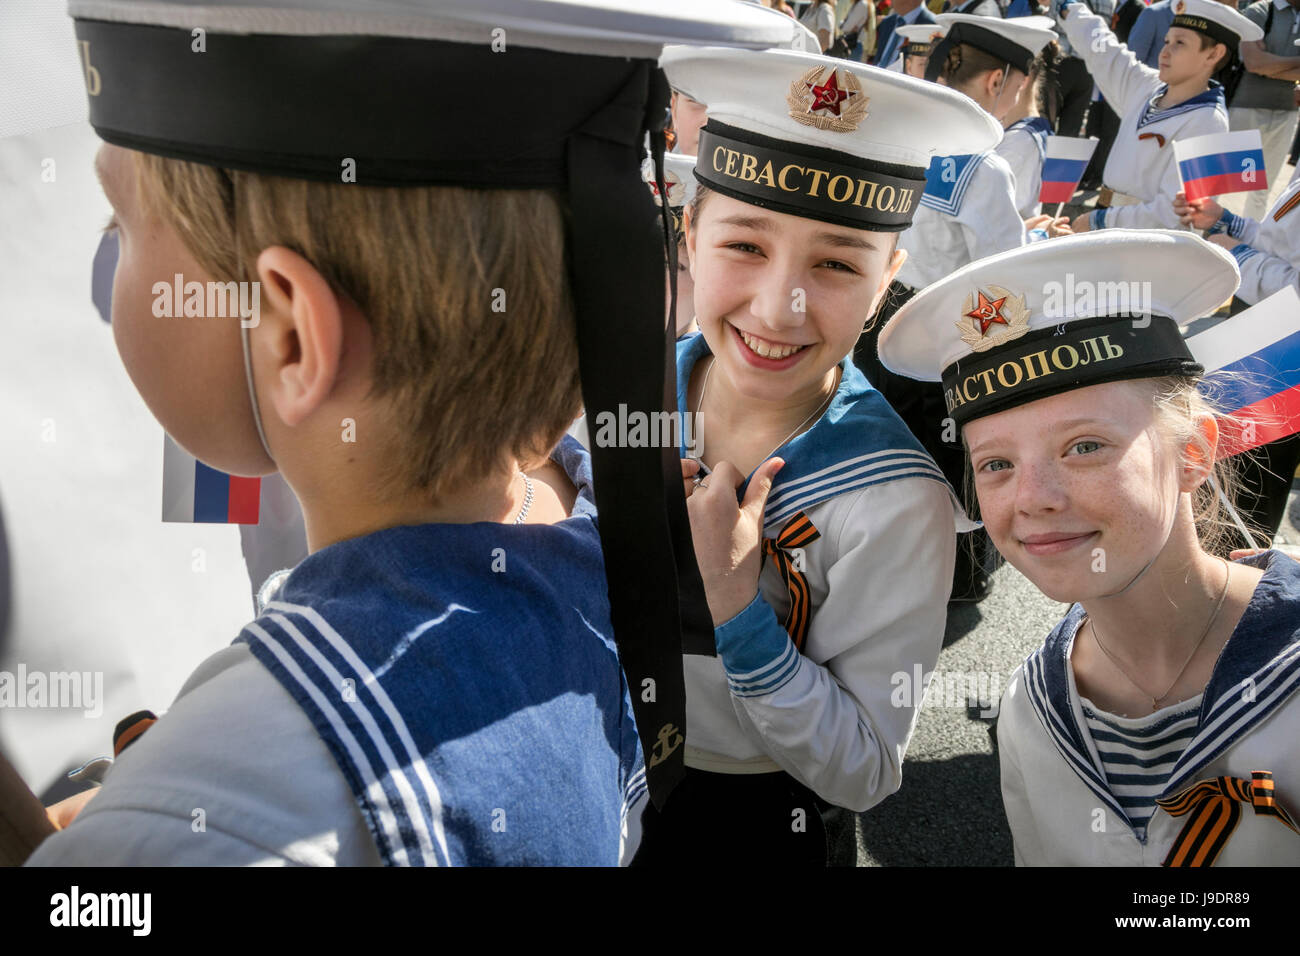 Participants in the May Day march in the form of sailors on the International Workers' Solidarity Day on the main street of Sevastopol town Stock Photo